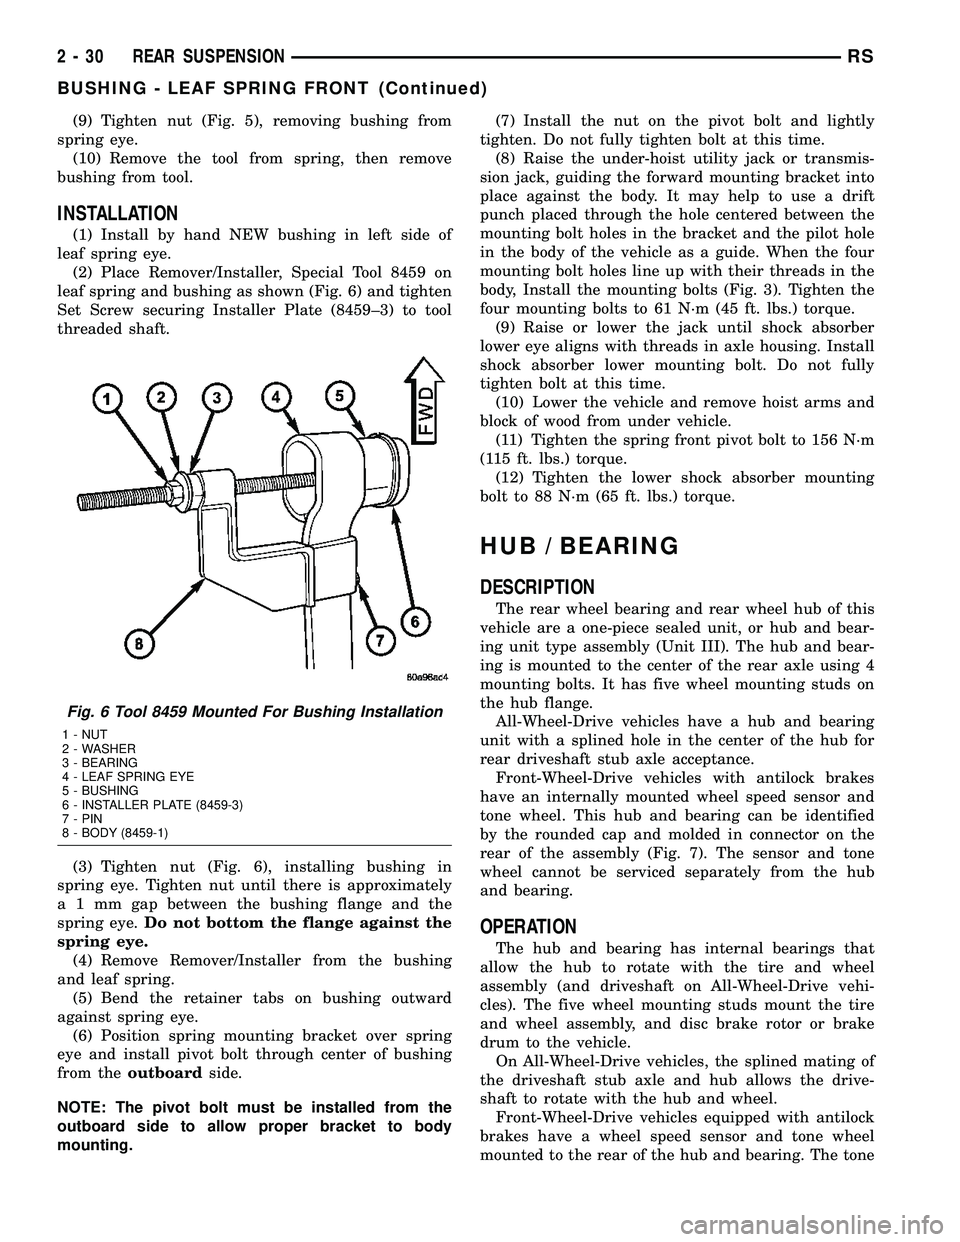 CHRYSLER VOYAGER 2005  Service Manual (9) Tighten nut (Fig. 5), removing bushing from
spring eye.
(10) Remove the tool from spring, then remove
bushing from tool.
INSTALLATION
(1) Install by hand NEW bushing in left side of
leaf spring ey